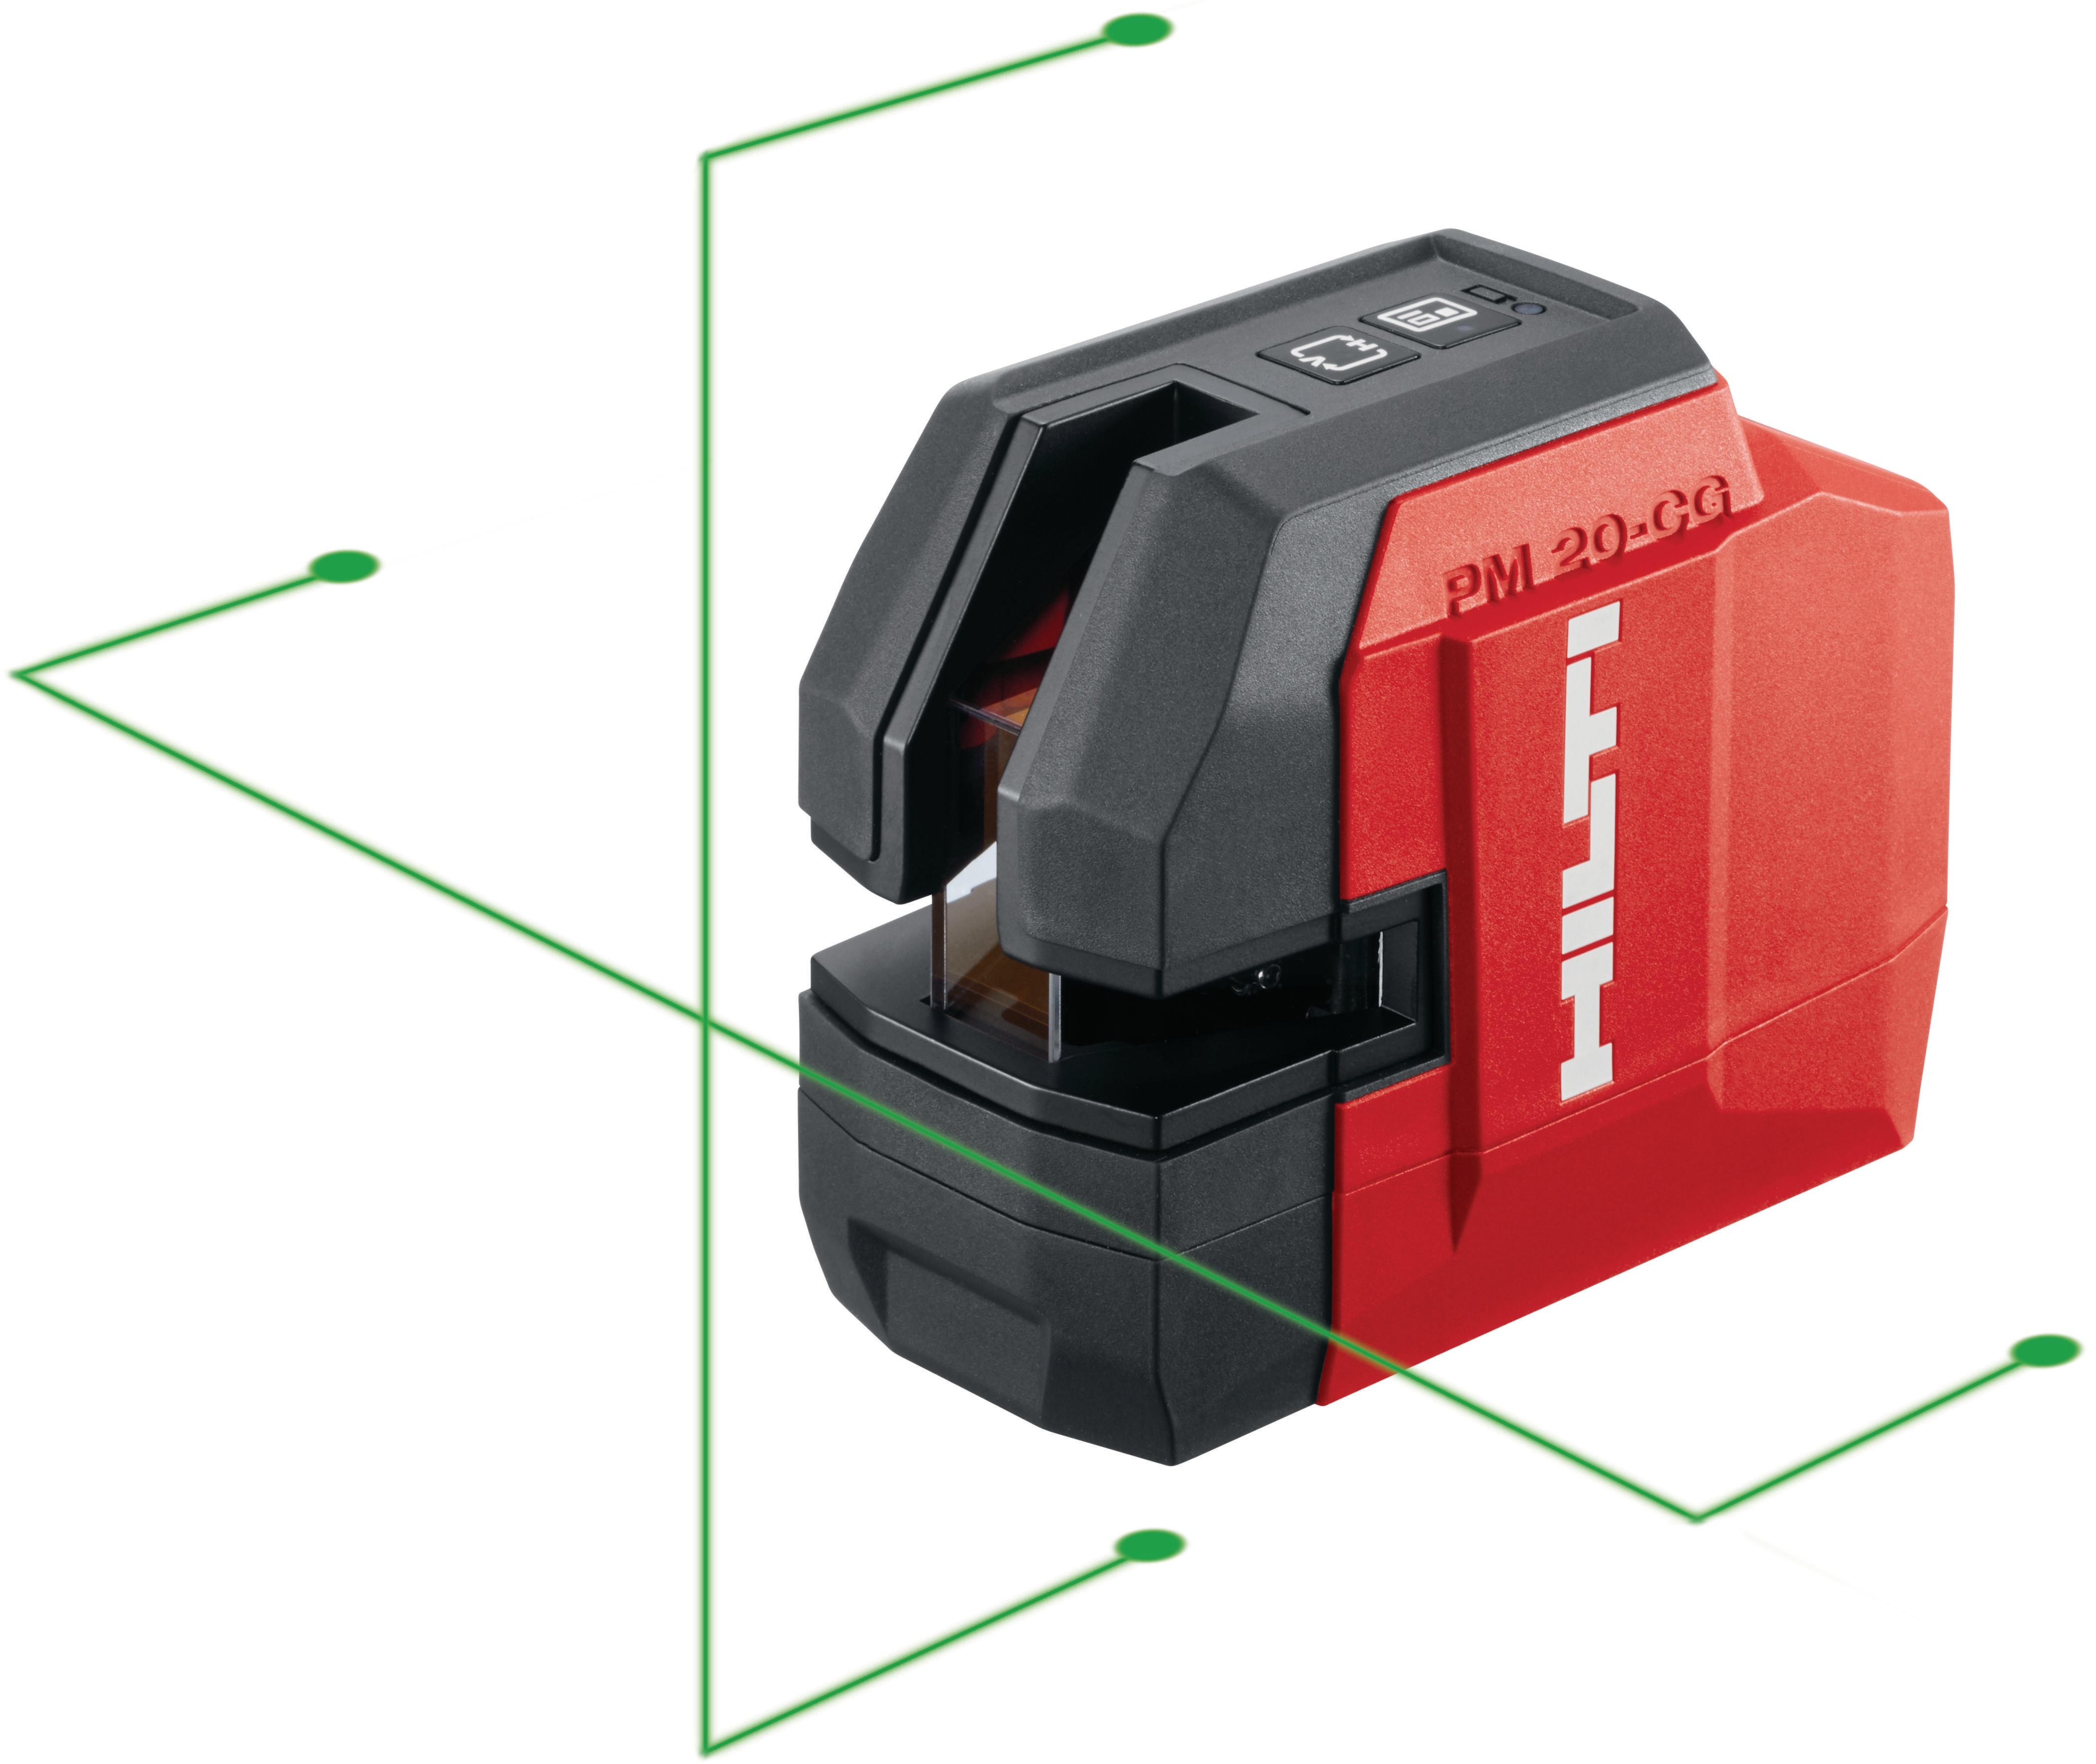 PM 20-CG Plumb and cross line laser - Laser layout tools - Hilti USA